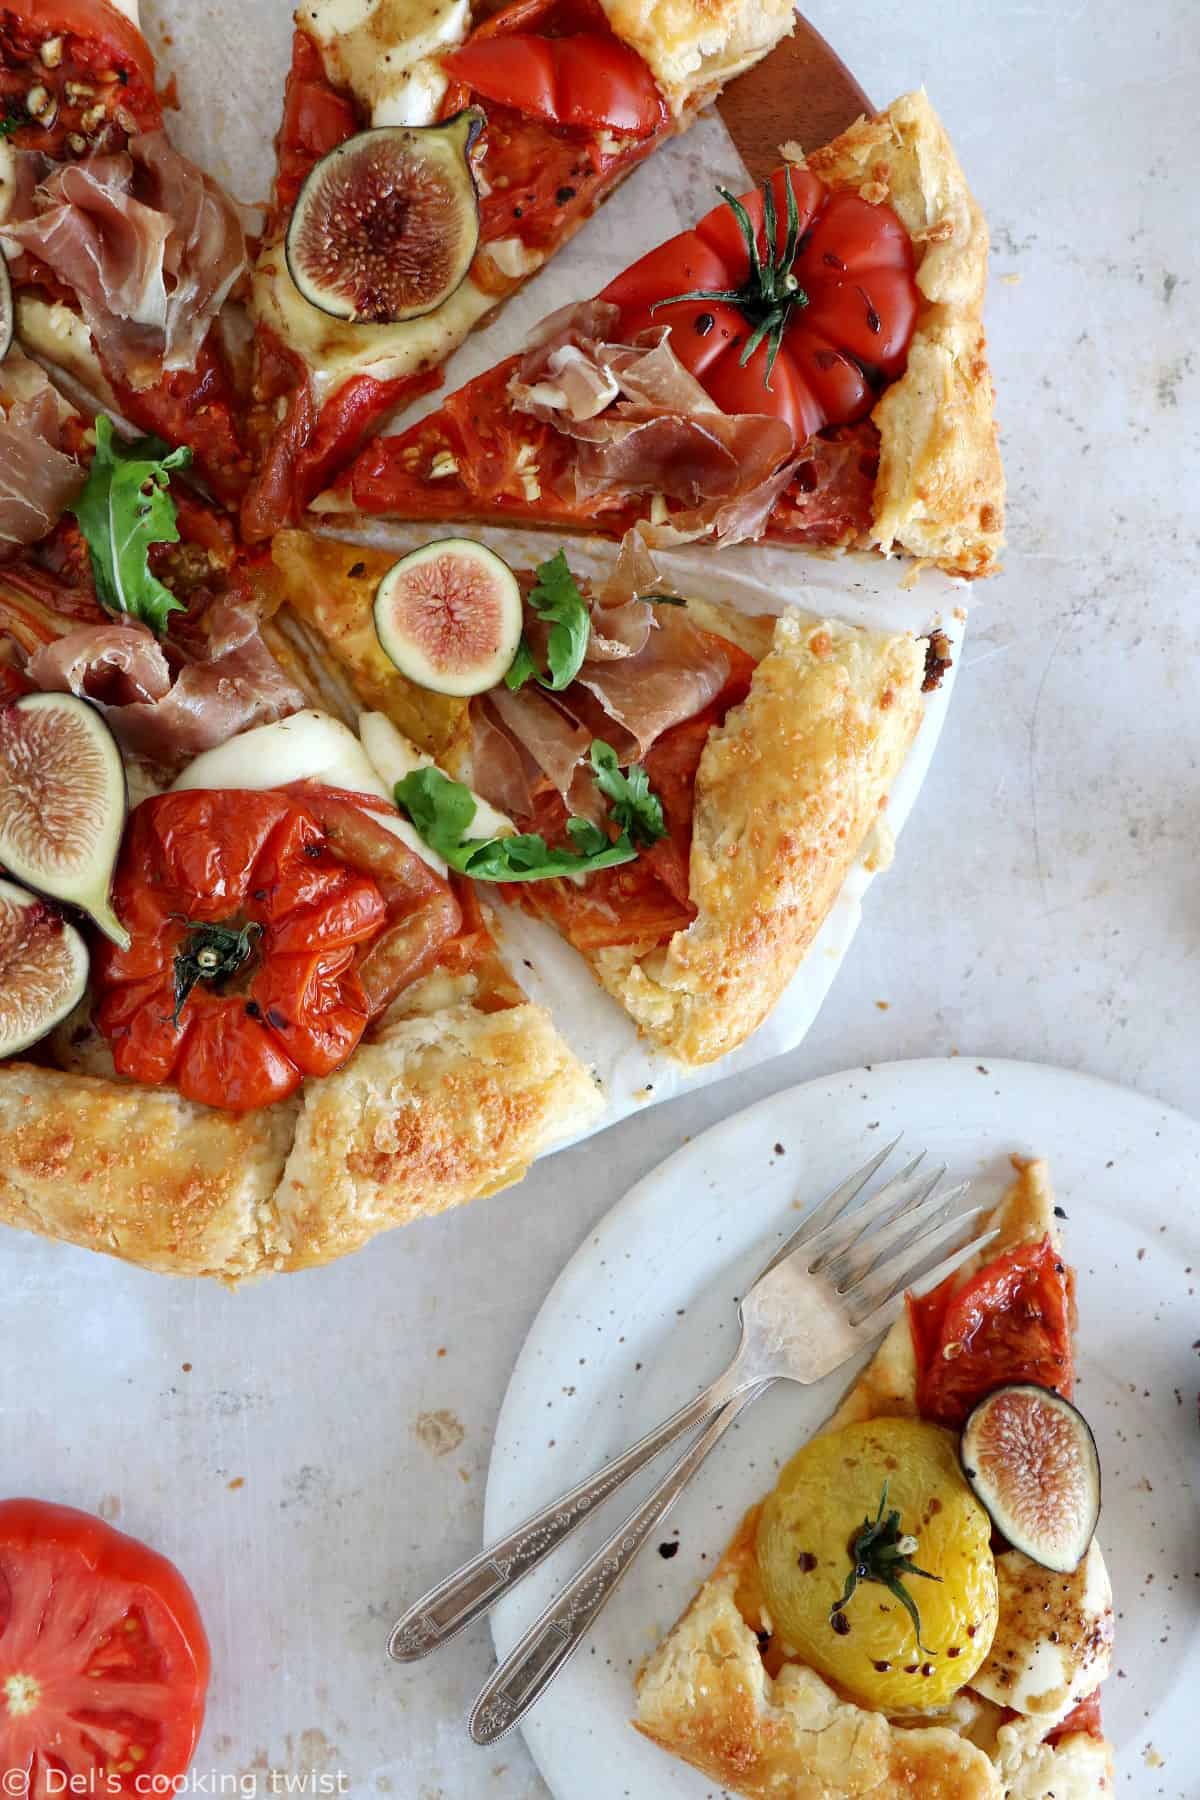 Balsamic fig tomato galette with prosciutto is a rustic tart recipe, with an elegant and sophisticated touch to it.